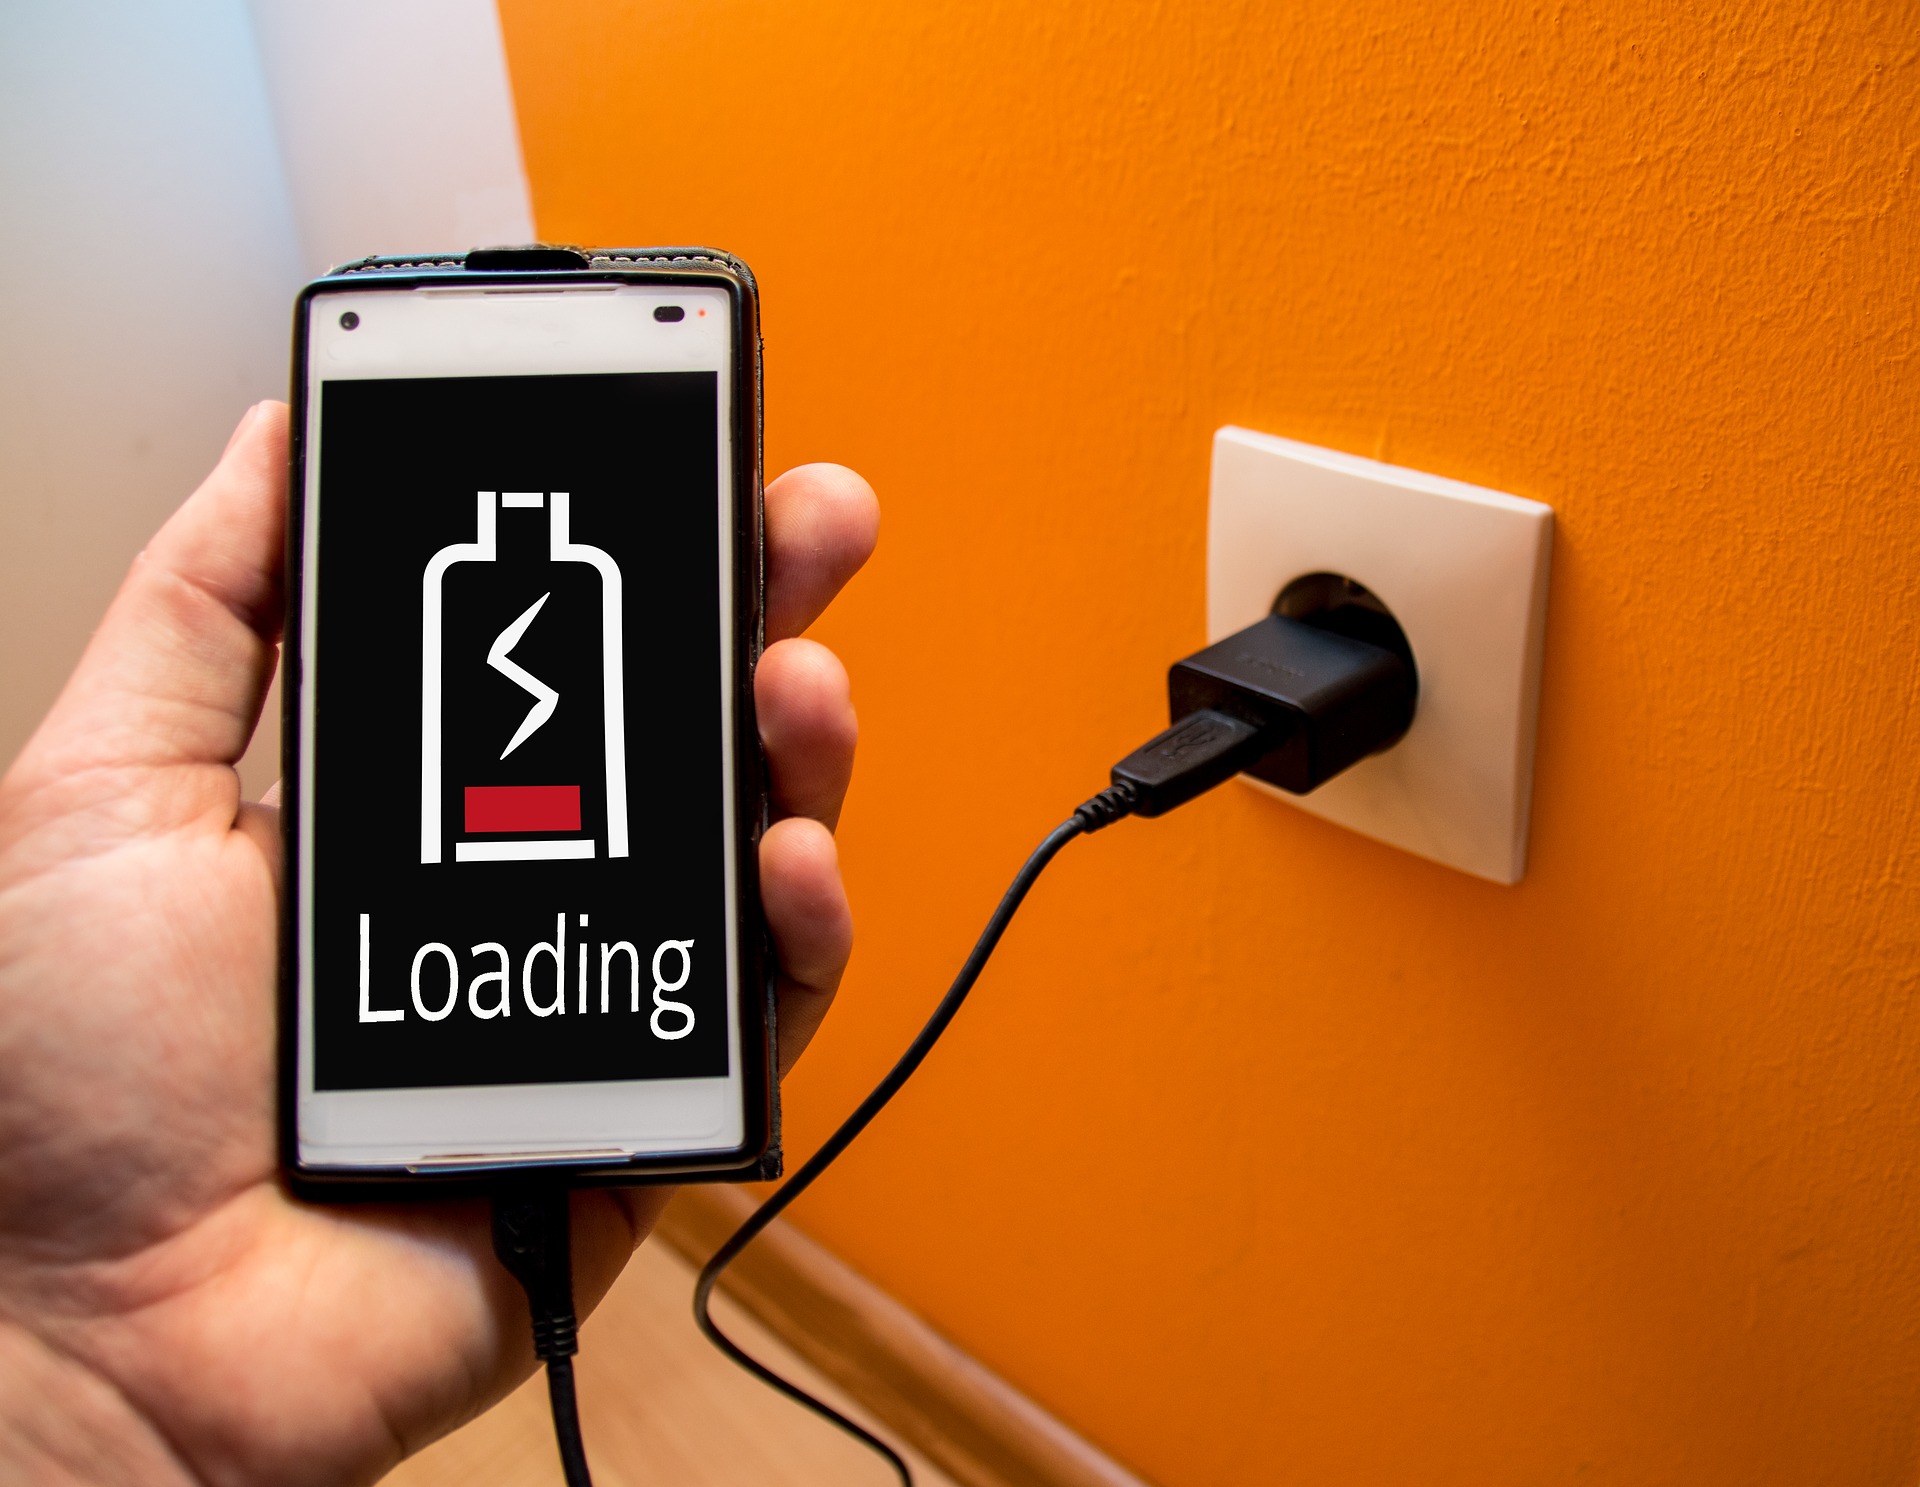 how to charge your phone faster - Power up using a wall charger